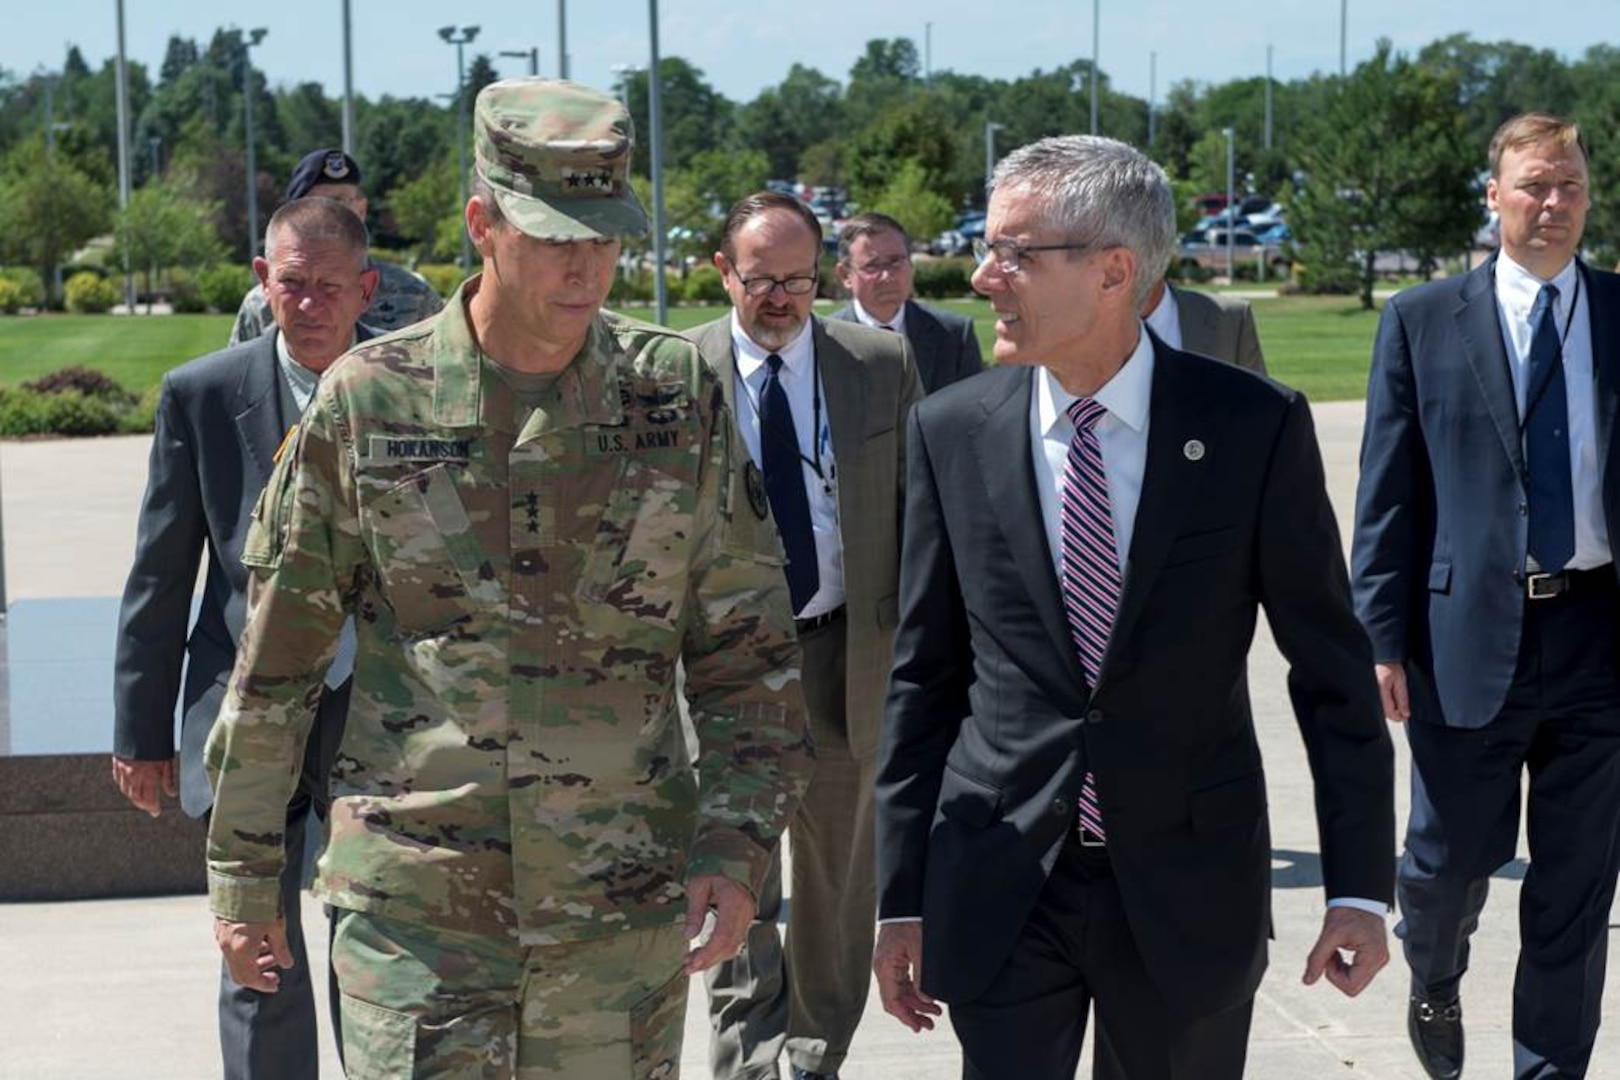 Lt. Gen. Daniel Hokanson, Deputy Commander of U.S. Northern Command, and Mr. Peter Neffenger, Administrator for the Transportation Security Administration, talk just before entering headquarters of North American Aerospace Defense Command and USNORTHCOM.  Neffenger was at the command talking with senior NORAD and USNORTHCOM officials on the importance of current information sharing between TSA and the two commands and to share Neffenger’s vision for mitigating current and future threats to transportation both in the homeland and abroad.  